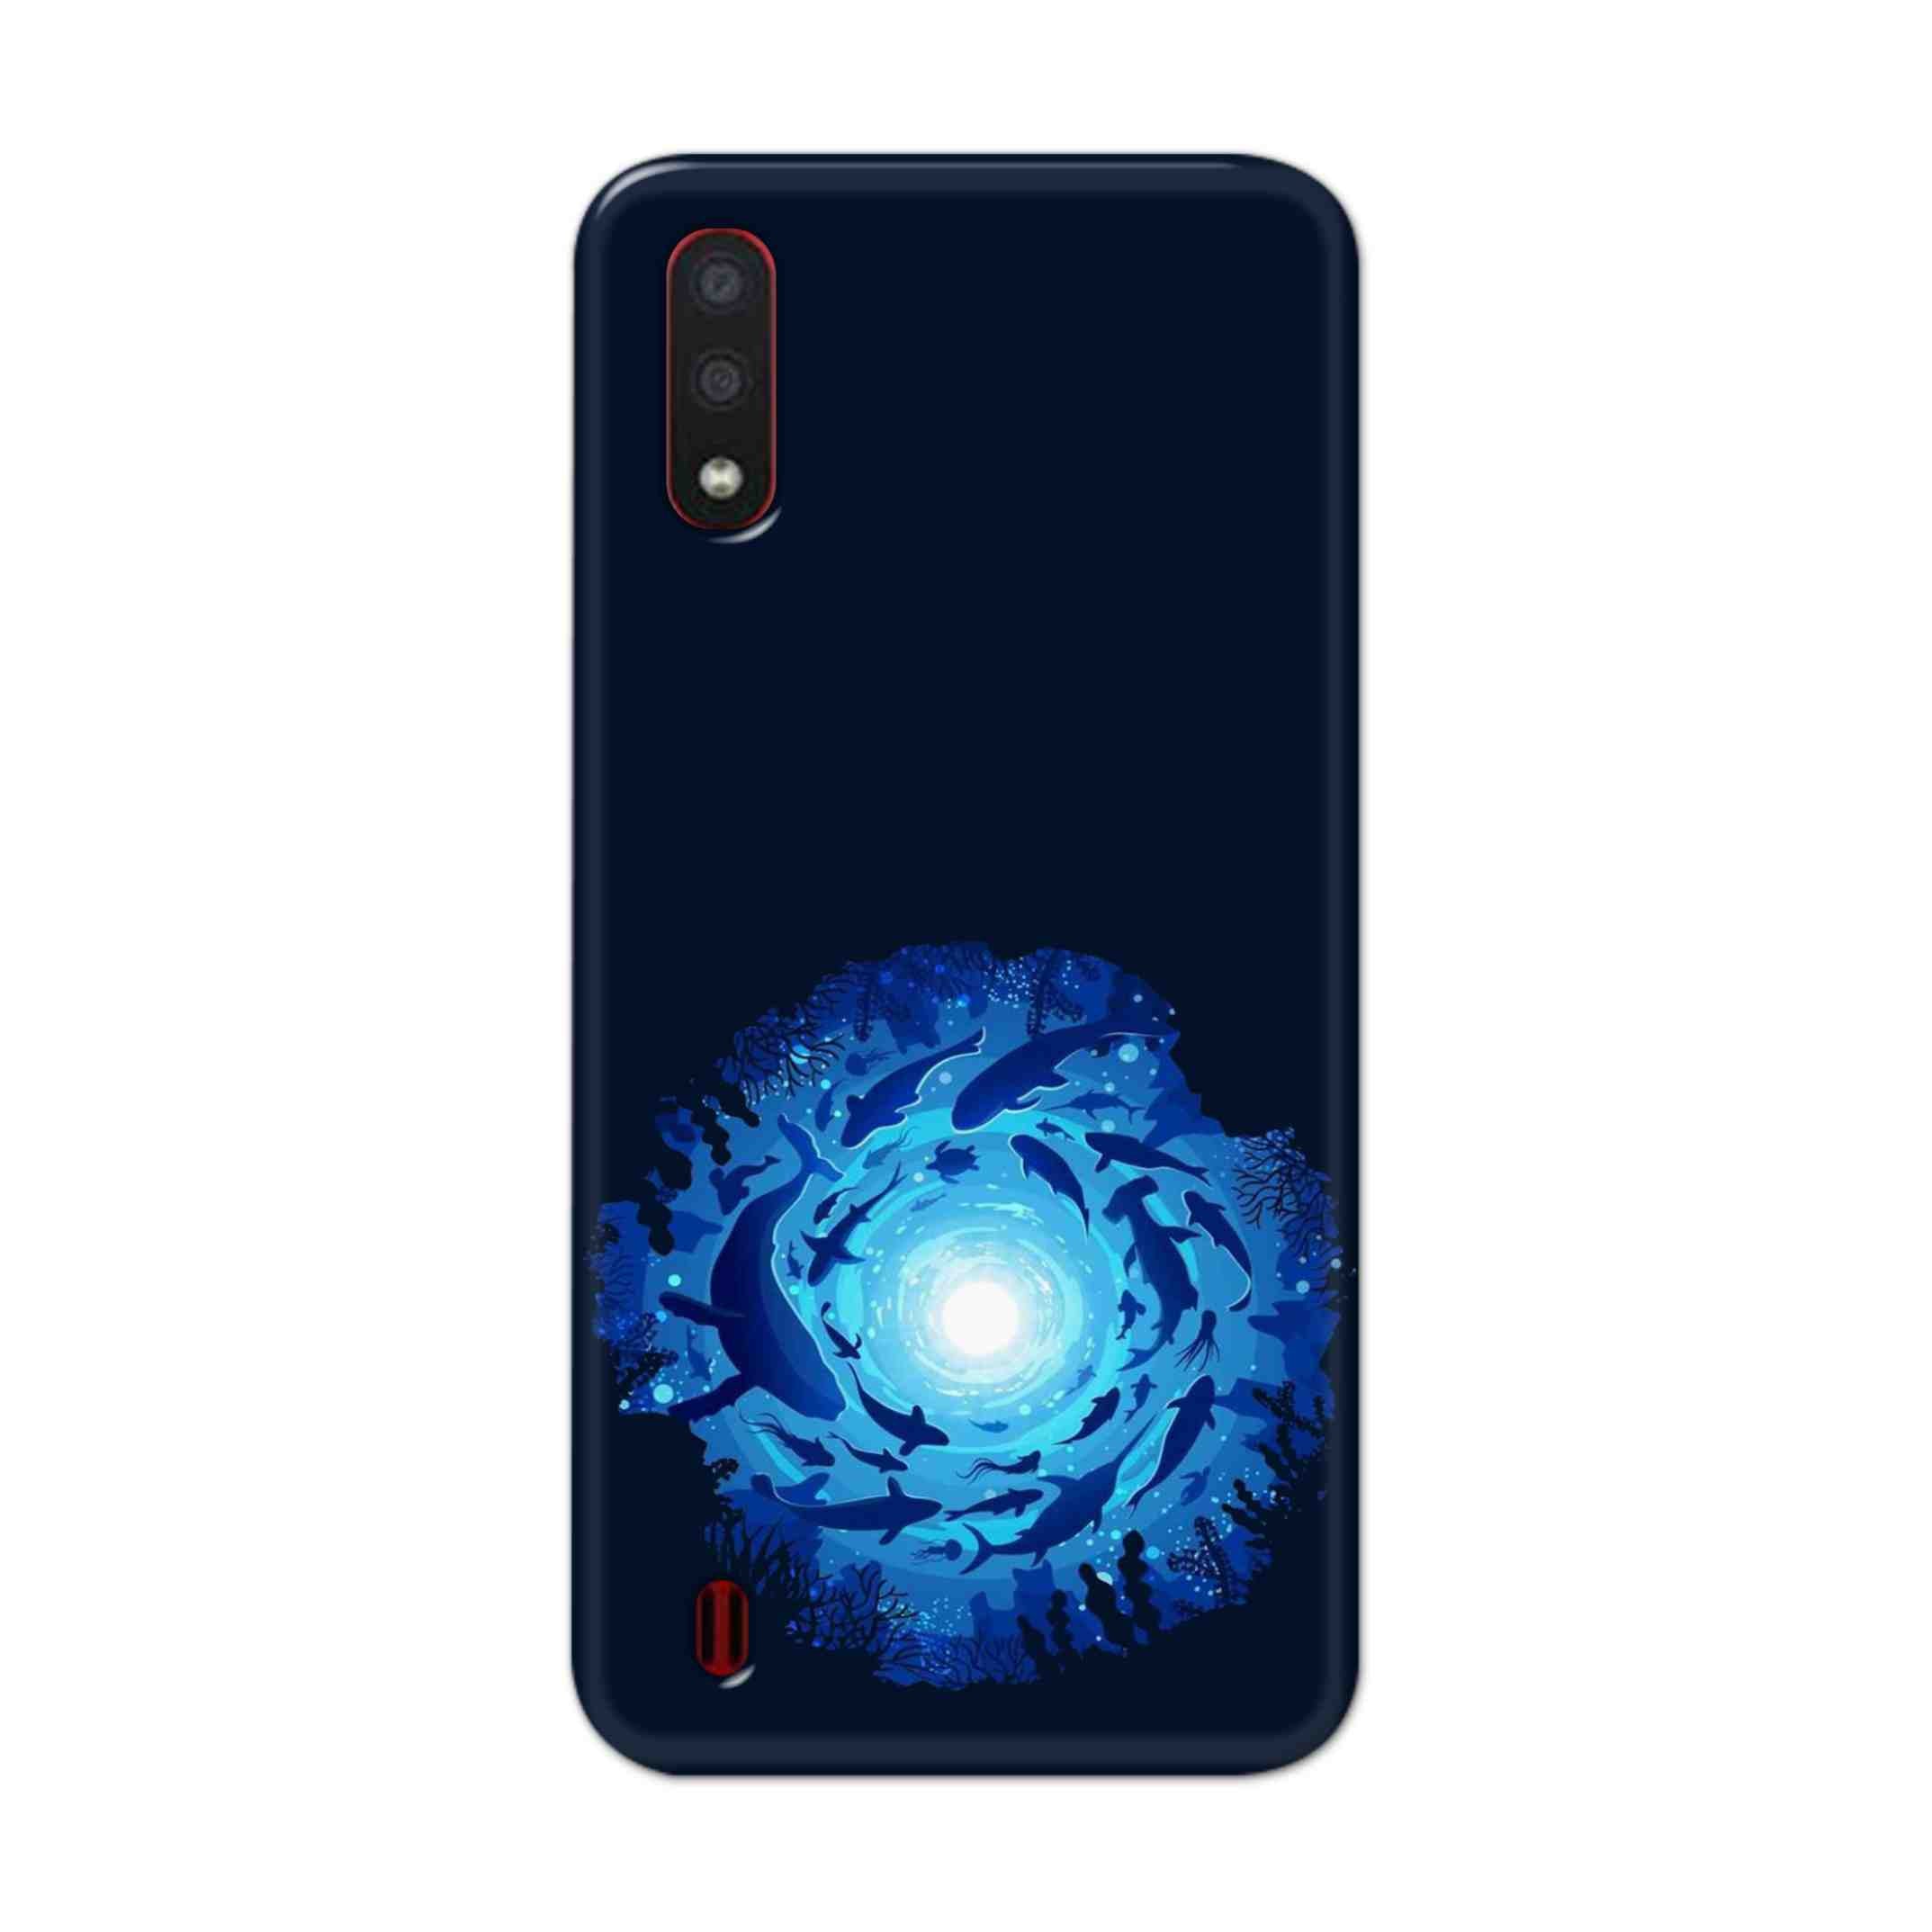 Buy Blue Whale Hard Back Mobile Phone Case/Cover For Samsung Galaxy M01 Online